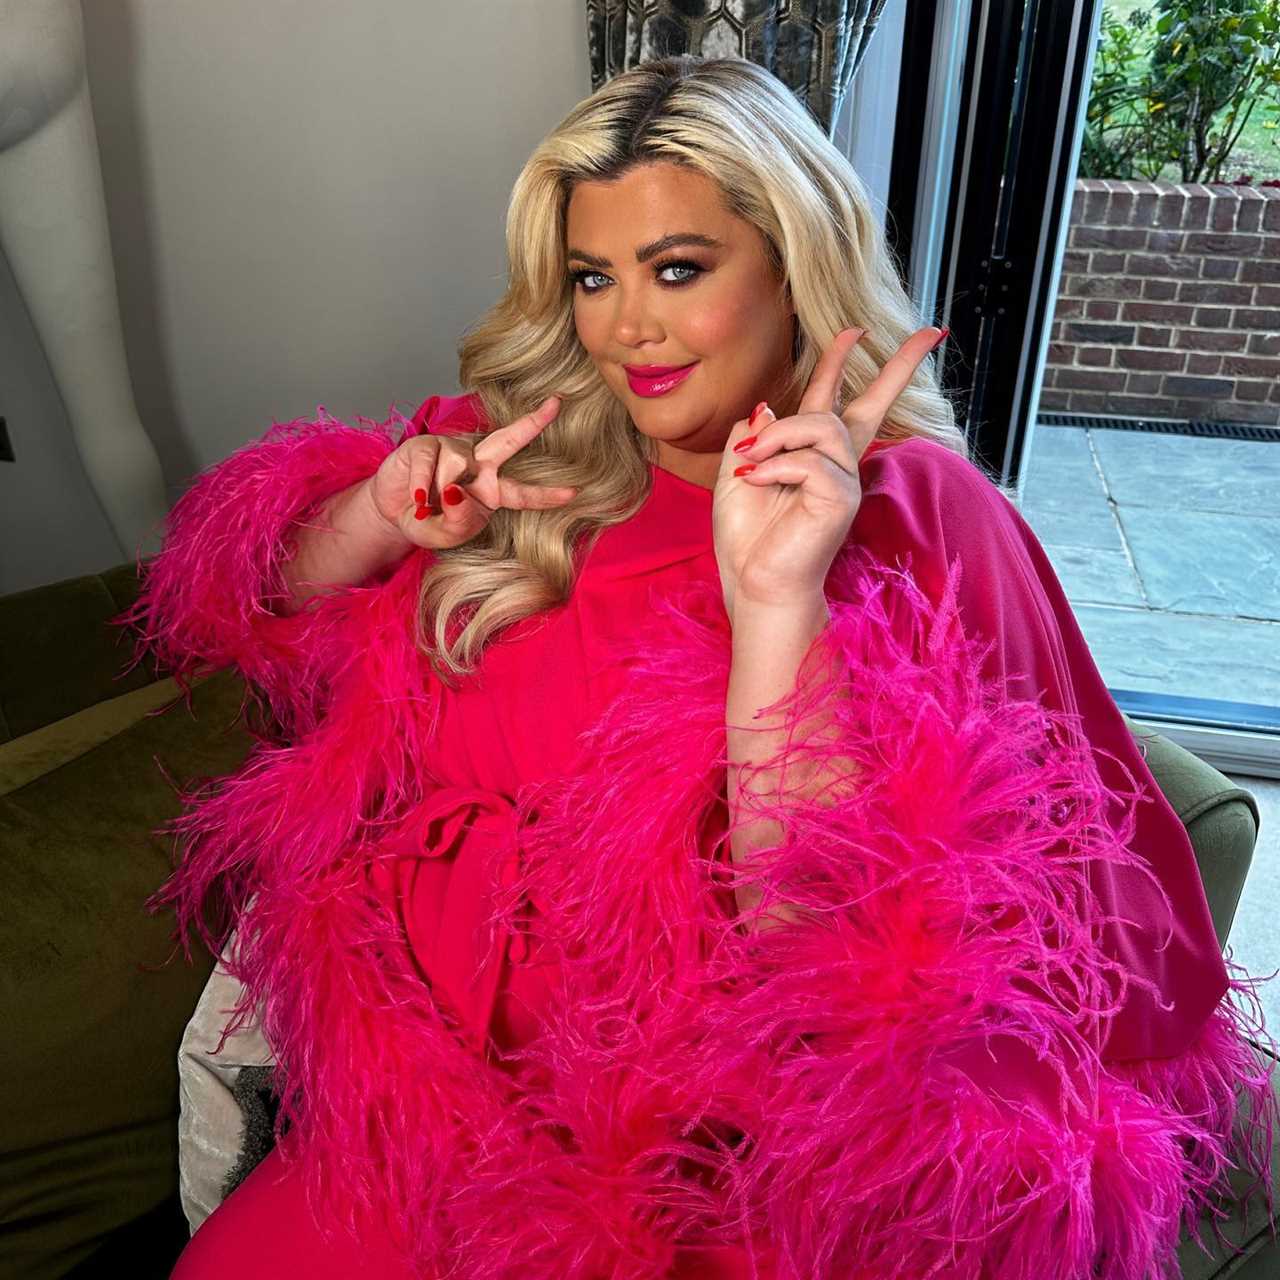 Gemma Collins Reveals Unexpected Friendship with A-list Actress